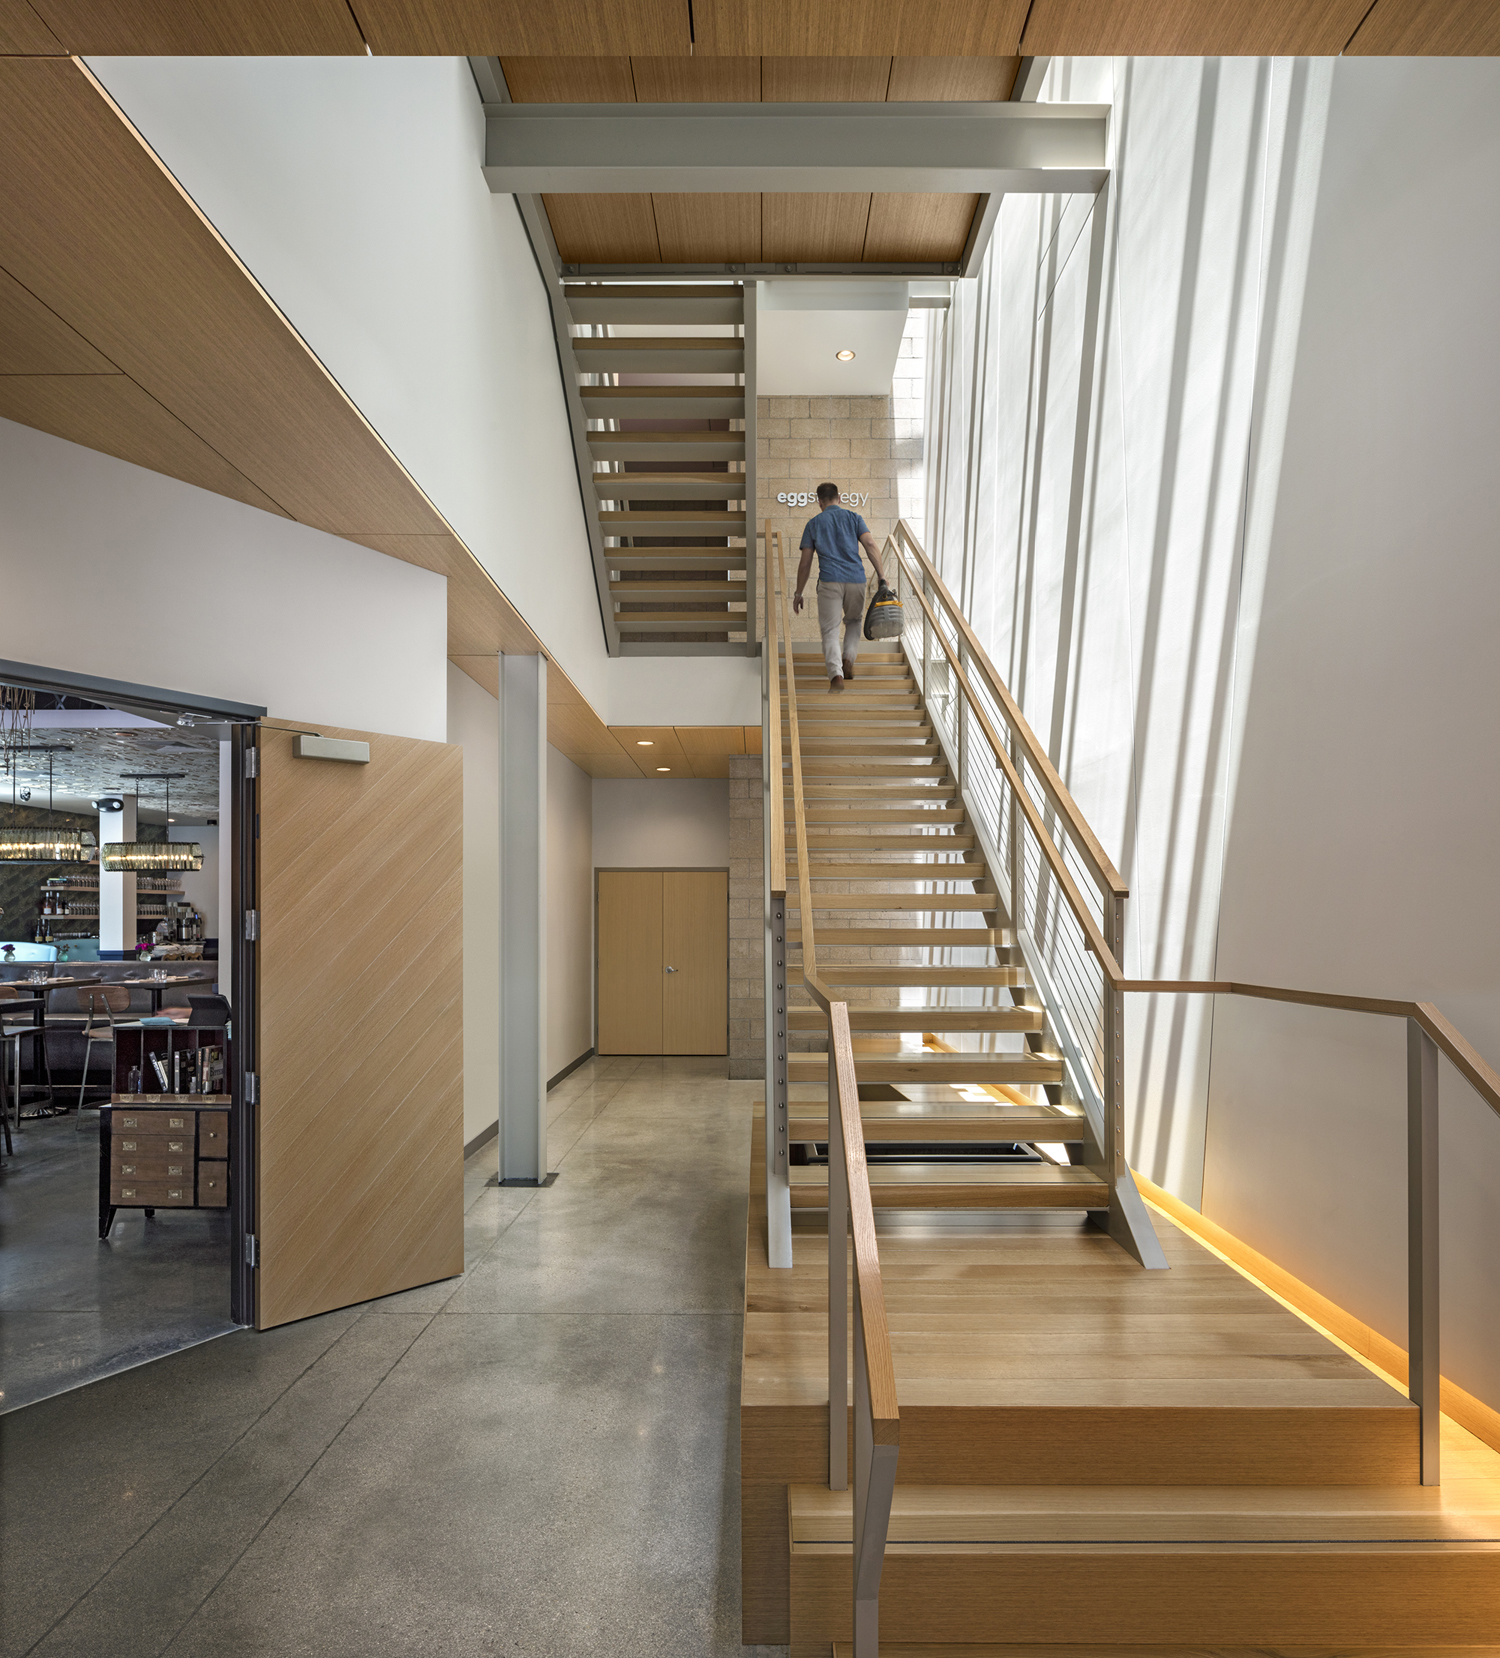 A grand open stair connecting the building’s lobby to upper-floor office levels is a key interior feature of Arch11’s design for the modern mixed-use commercial building (photo: Raul Garcia).